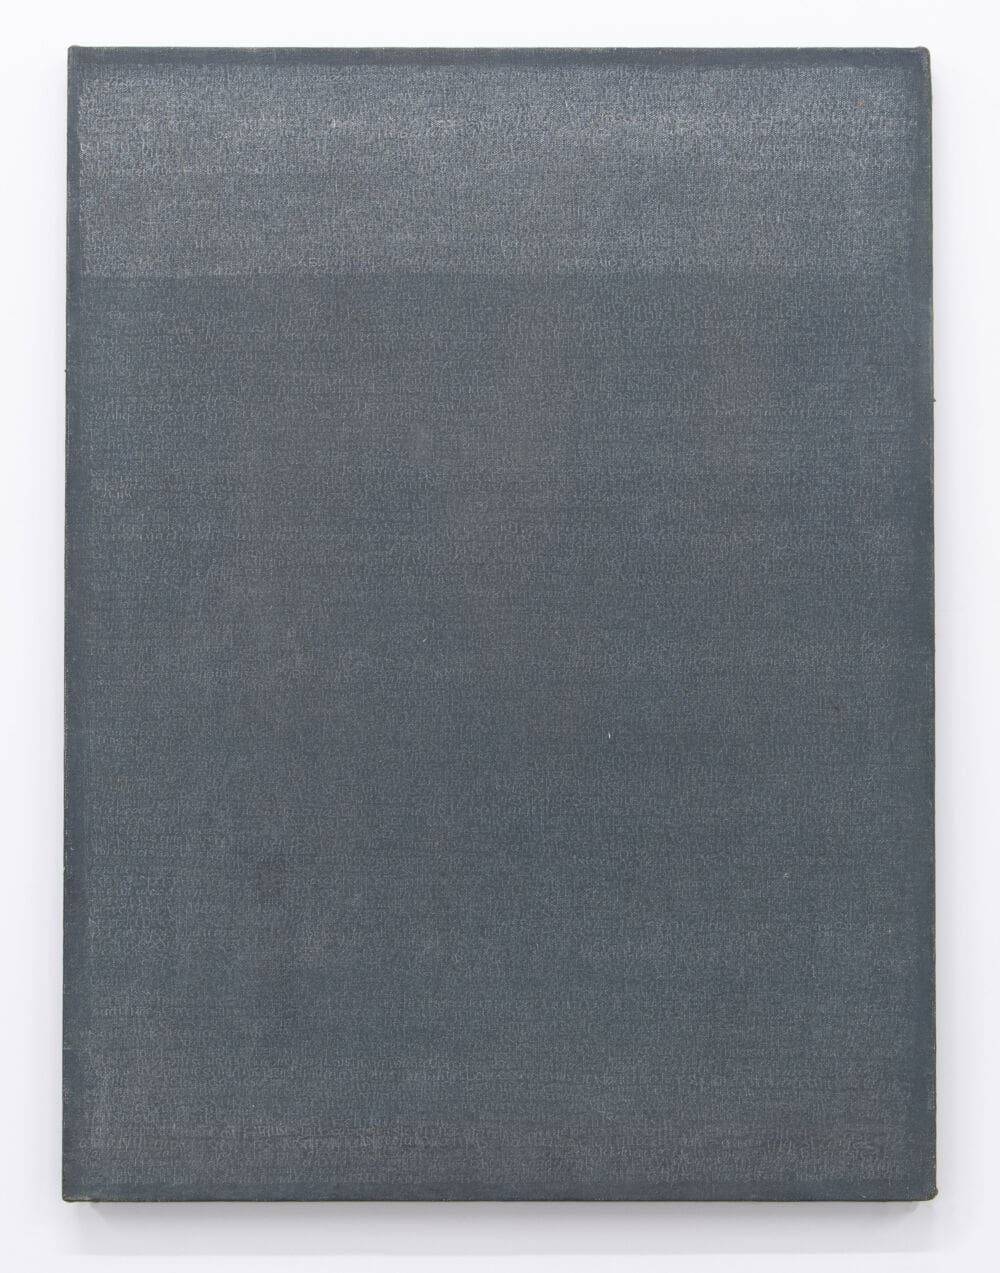 Rudolf Baranik Words Series, 1980 Oil and silver graphite on canvas 24 x 18 inches (61 x 45.7 cm)